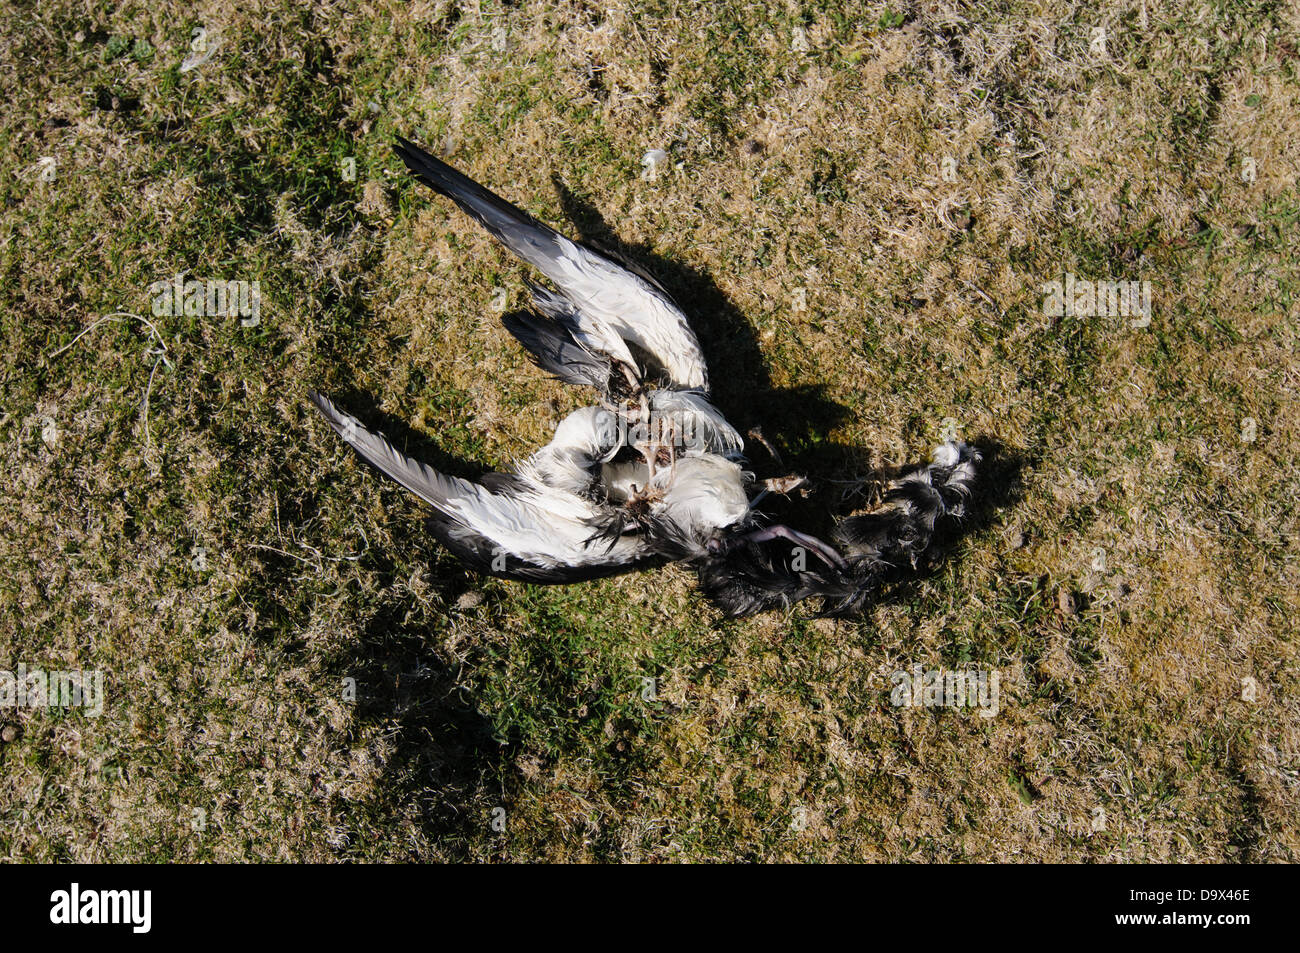 Dead body of a Manx Shearwater. When the Manx Shearwaters arive on Skomer Island during the night they are attacked and killed by gulls Stock Photo